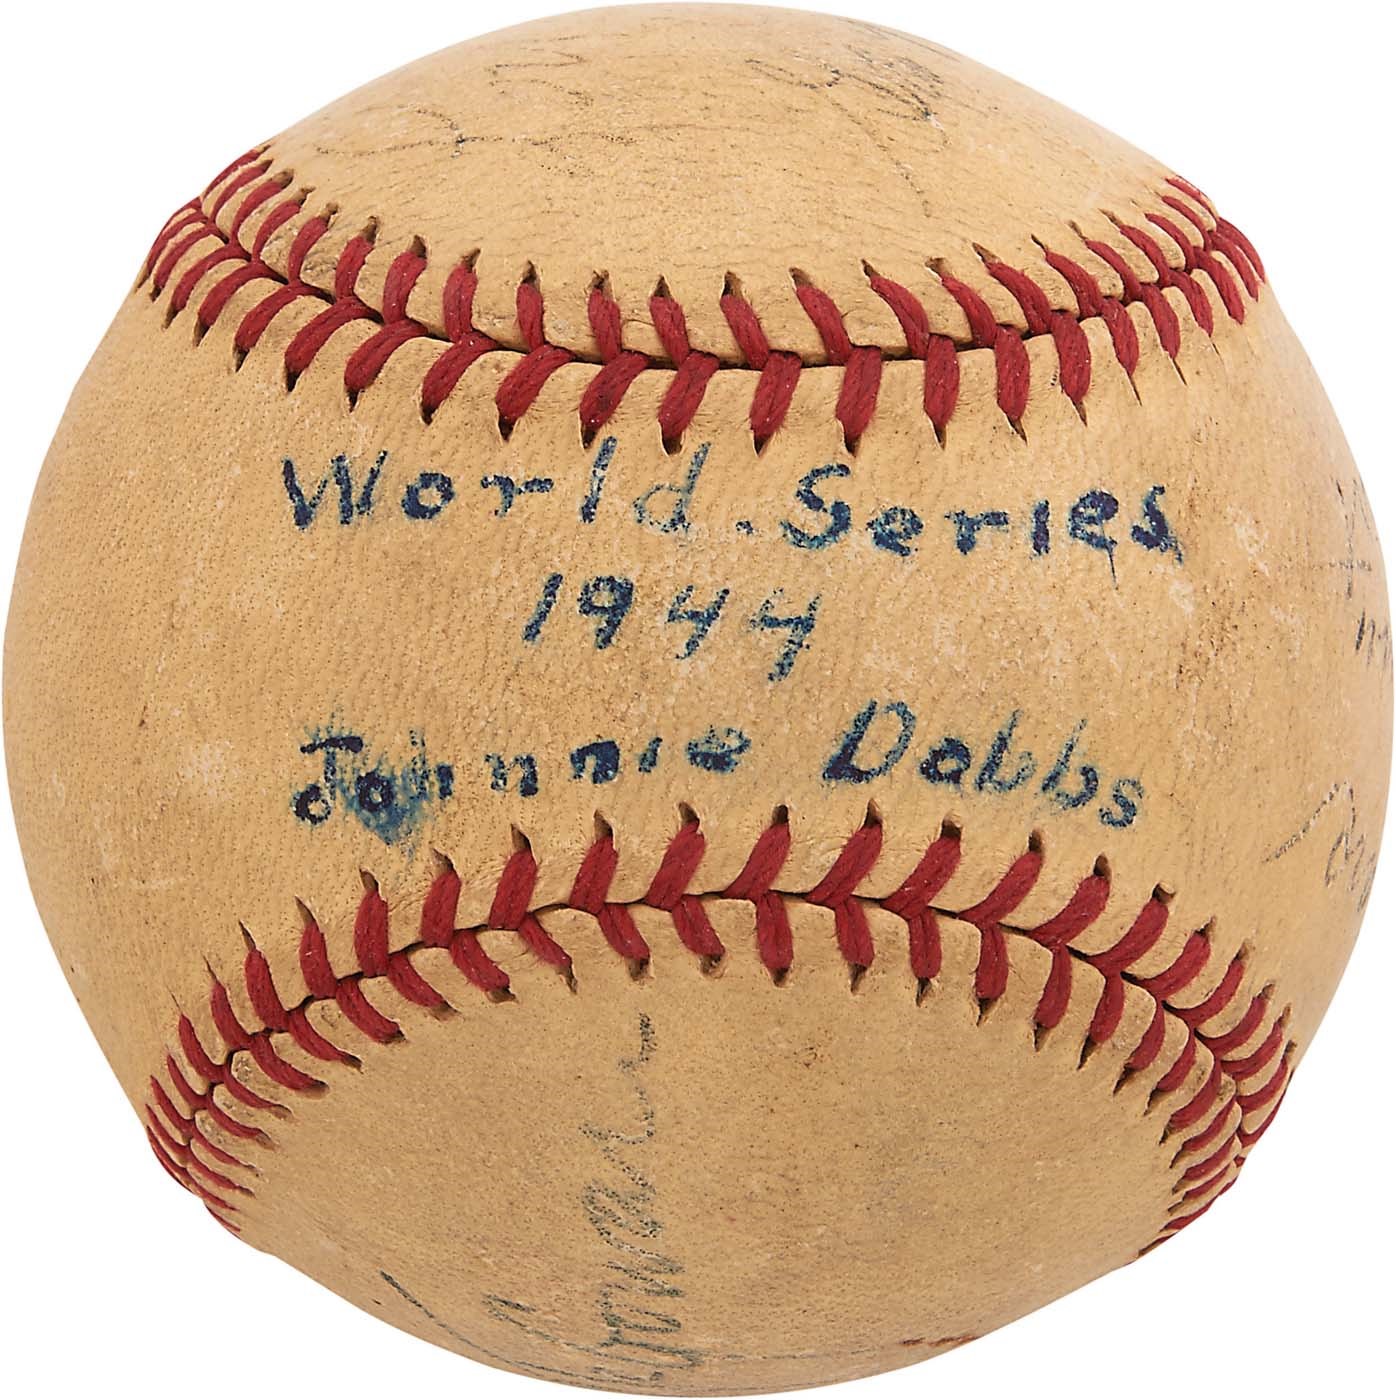 - 1944 World Series Game Used Baseball Signed by Umpire Crew w/Bill McGowan (PSA)